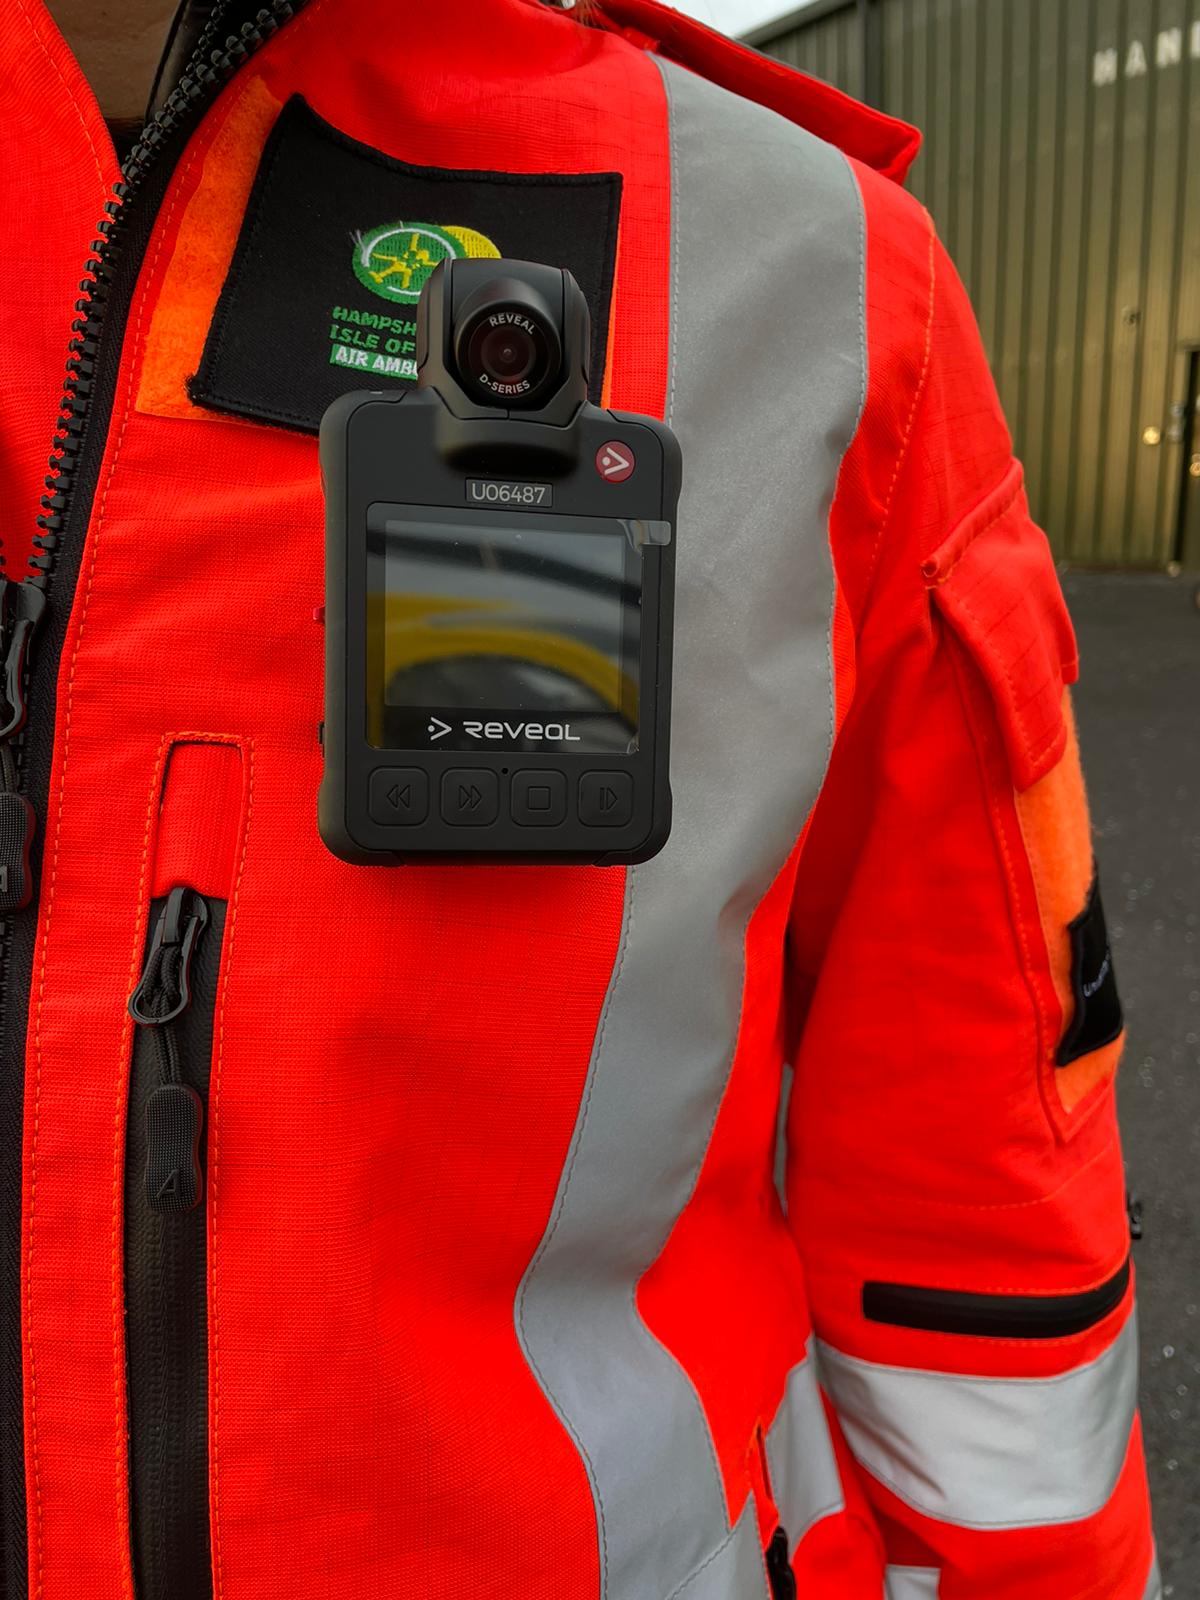 Close up of a body camera attached to an orange flight suit.